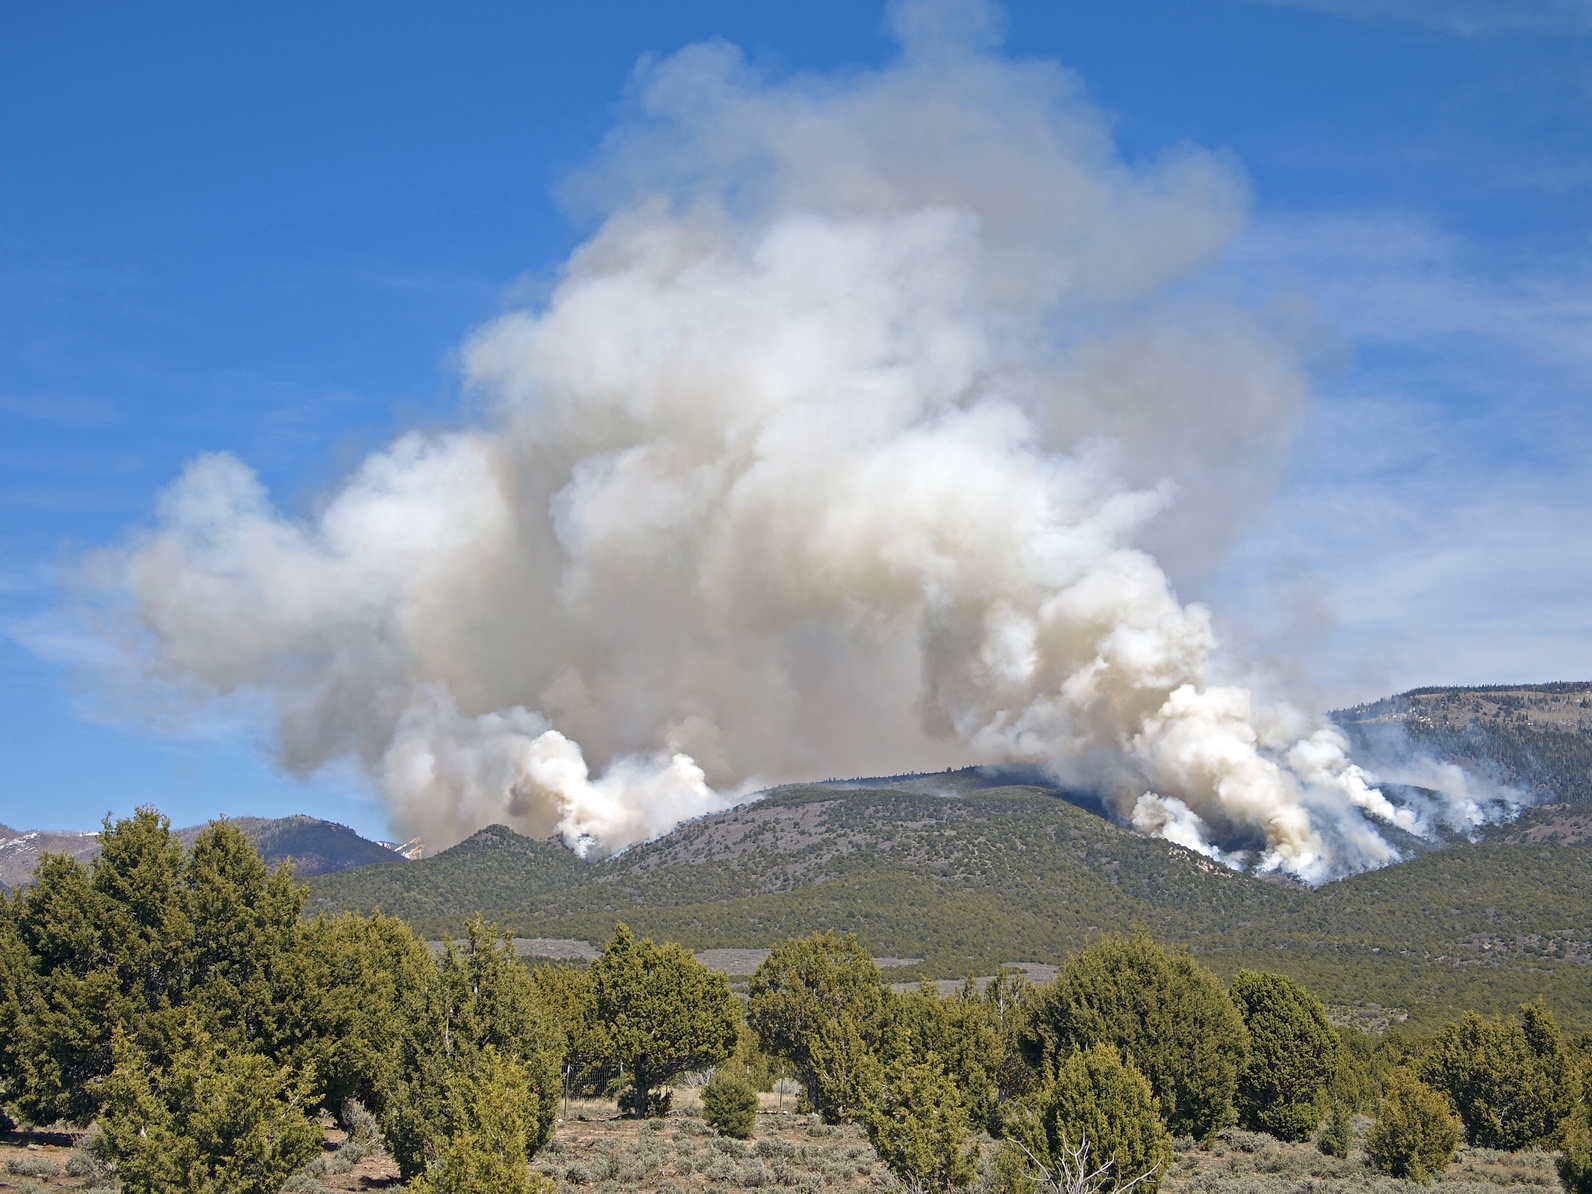 Wildfire Safety Tips To Minimize Your Risk